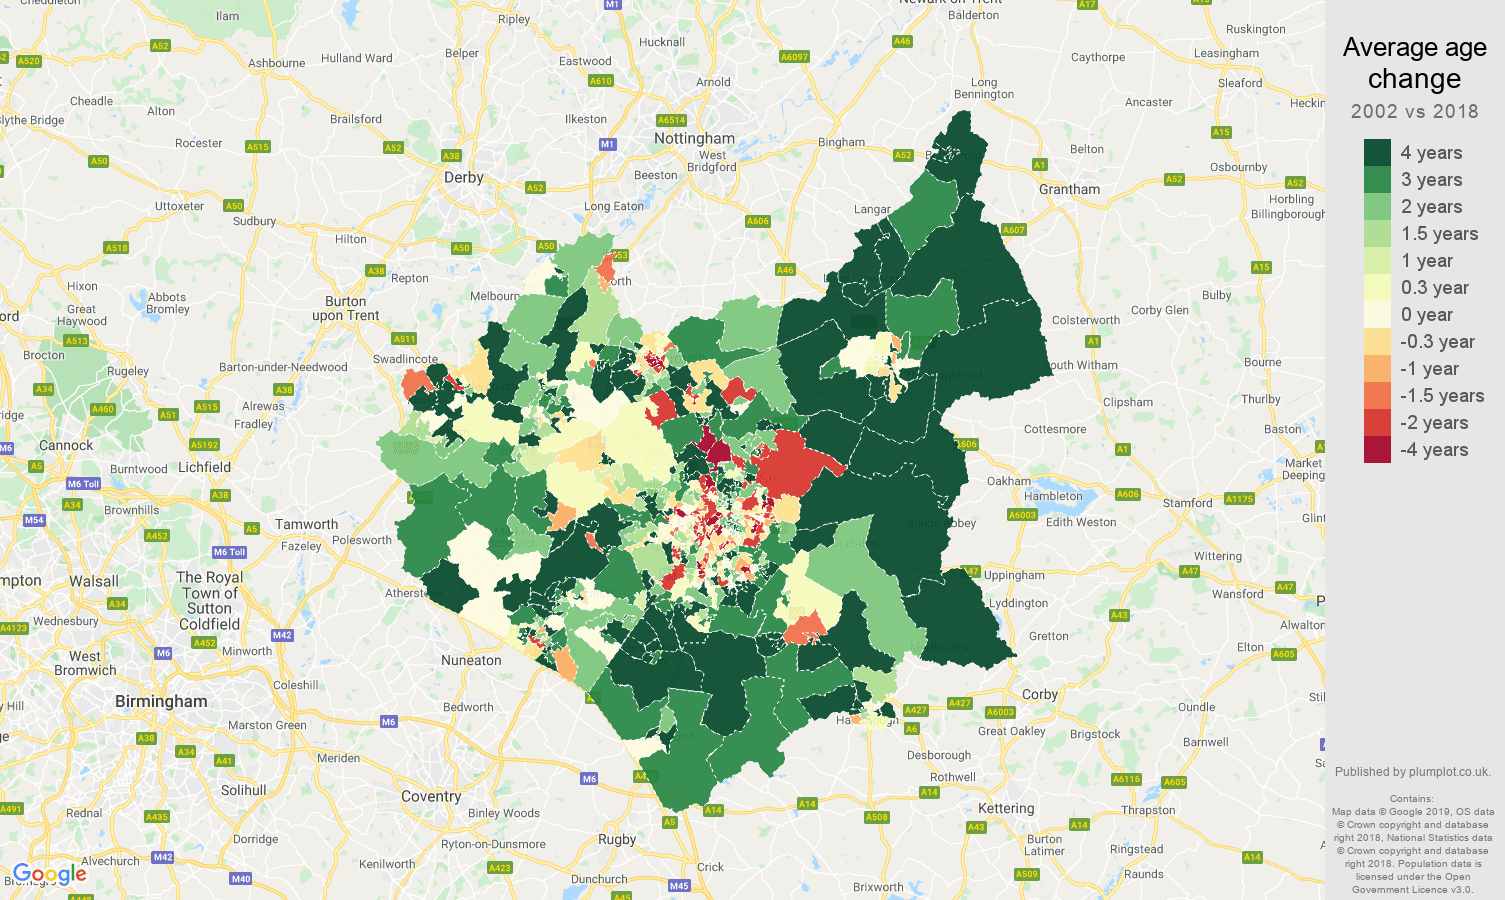 Leicestershire average age change map